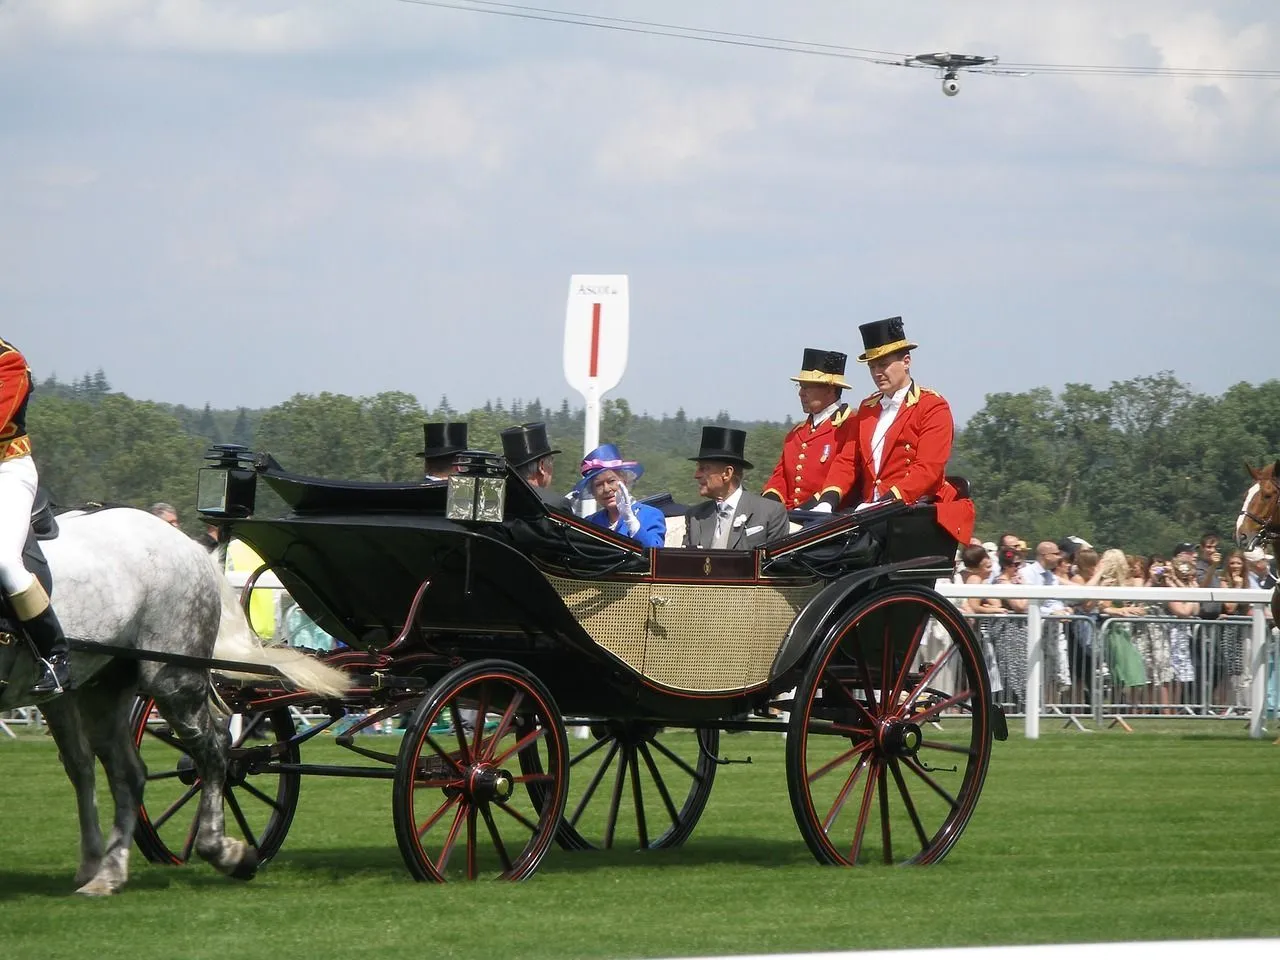 Queen Elizabeth and her royal family is parading in a horse chariot